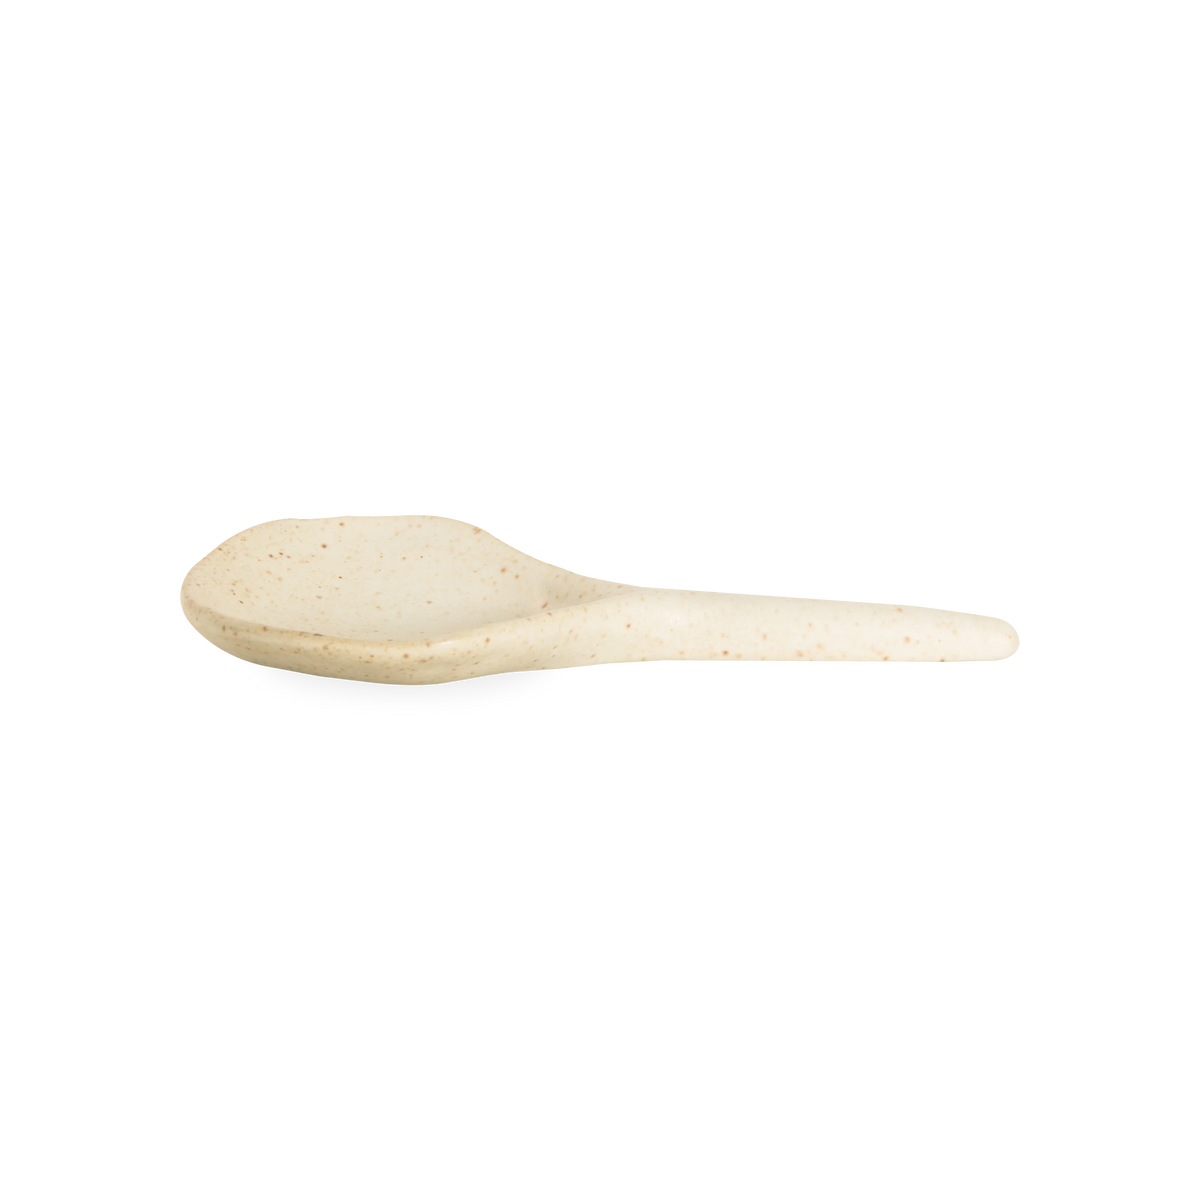 Expertly handmade, the Stoneware Serving Spoon features rounded edges on a wide body with a flat base and a large handle.